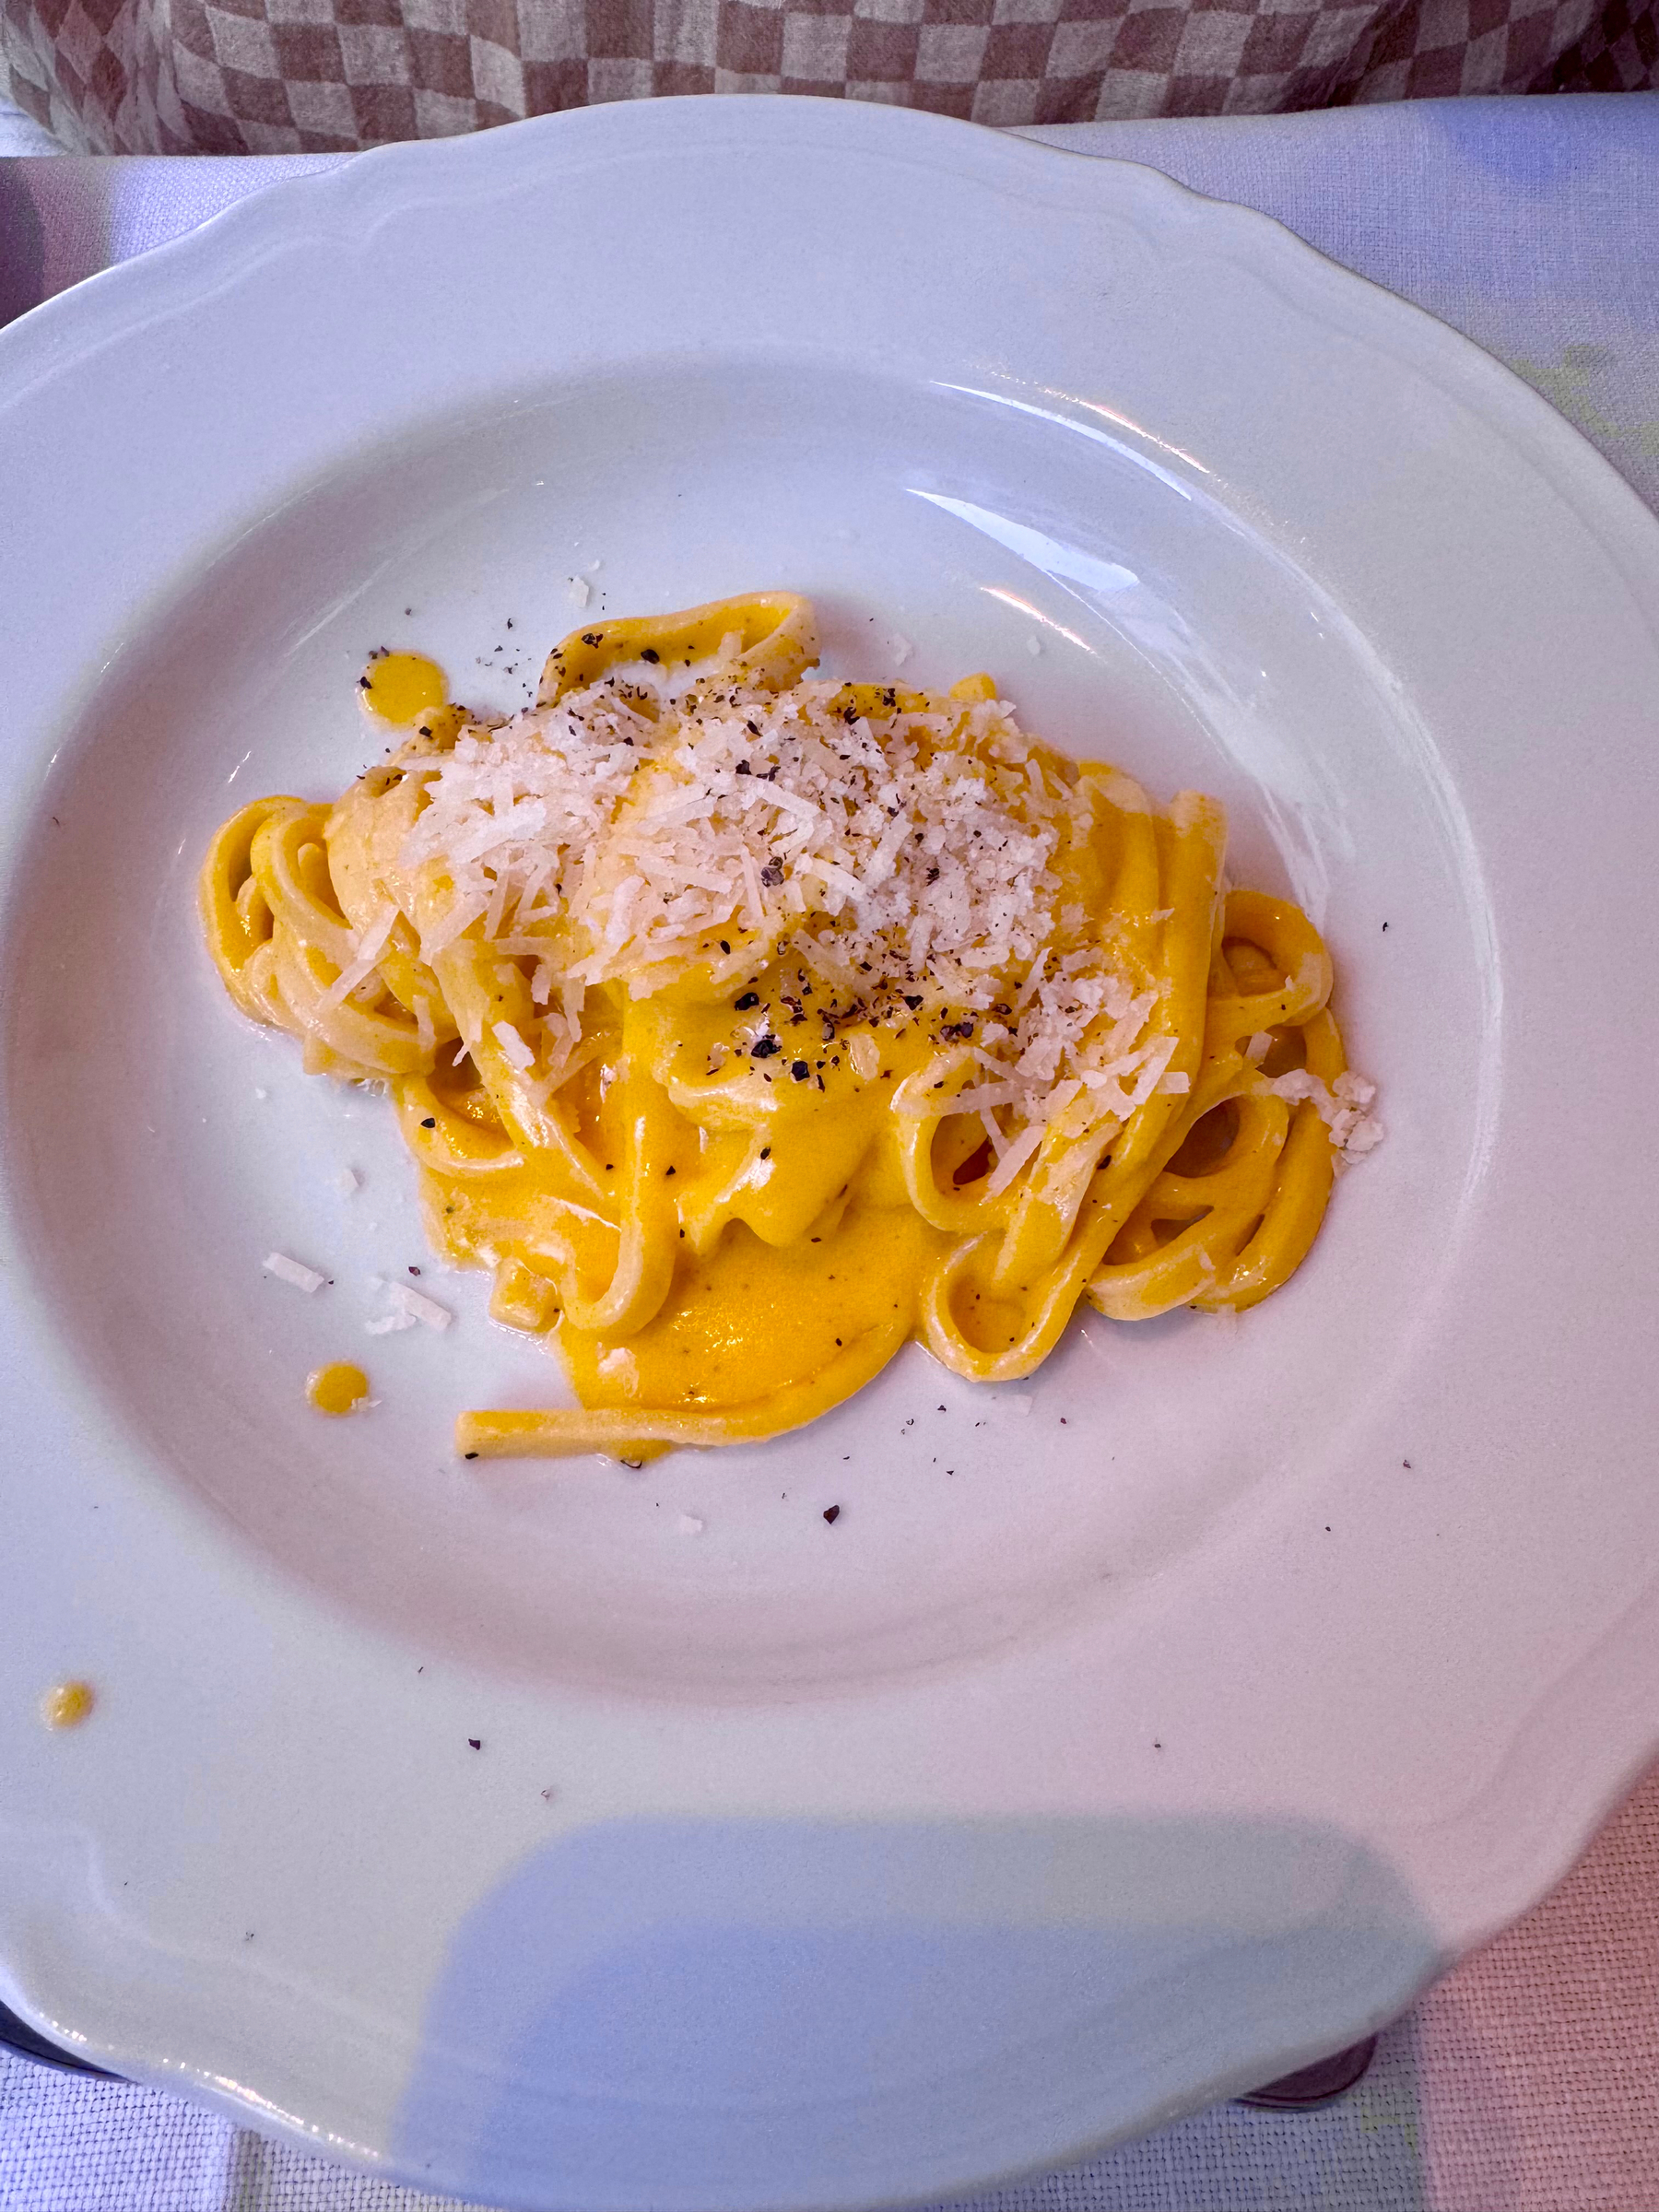 A white plate containing a serving of creamy pasta, likely tagliatelle, topped with grated cheese and a sprinkle of black pepper. The dish is called cachio e burro. 